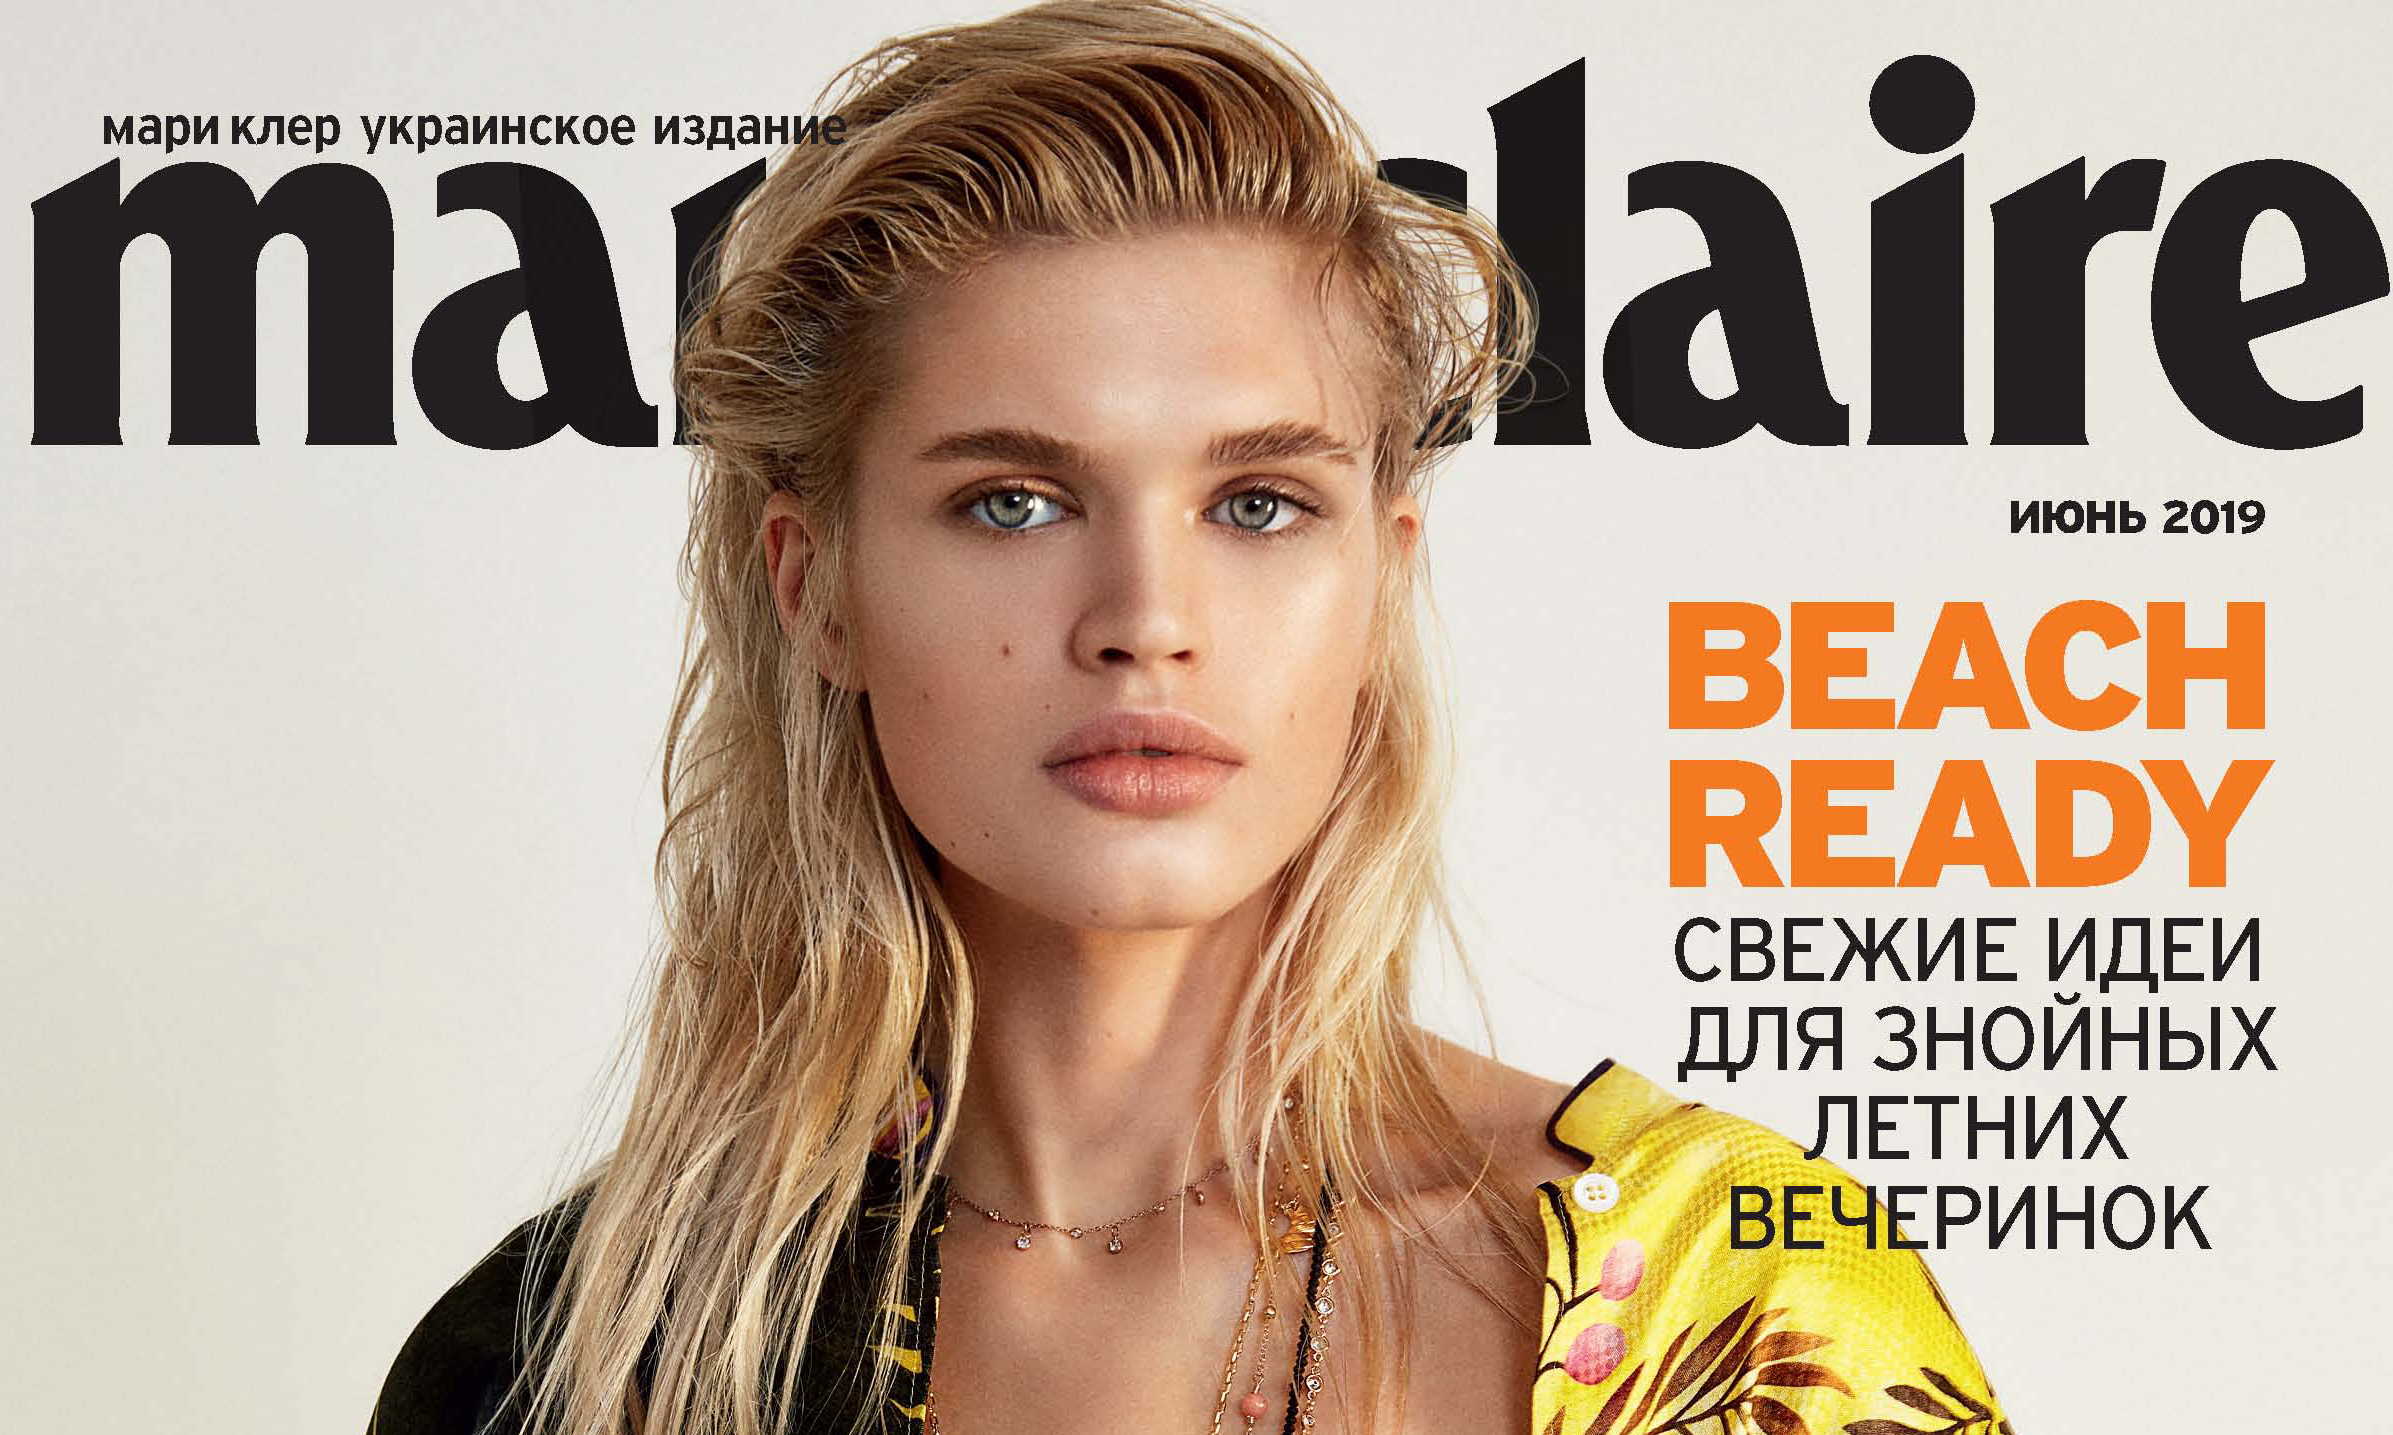 Marie claire 2024. Marie Claire сентябрь 2019. Мари Клер дюбальдо. Мари Клер 2012 Украина.